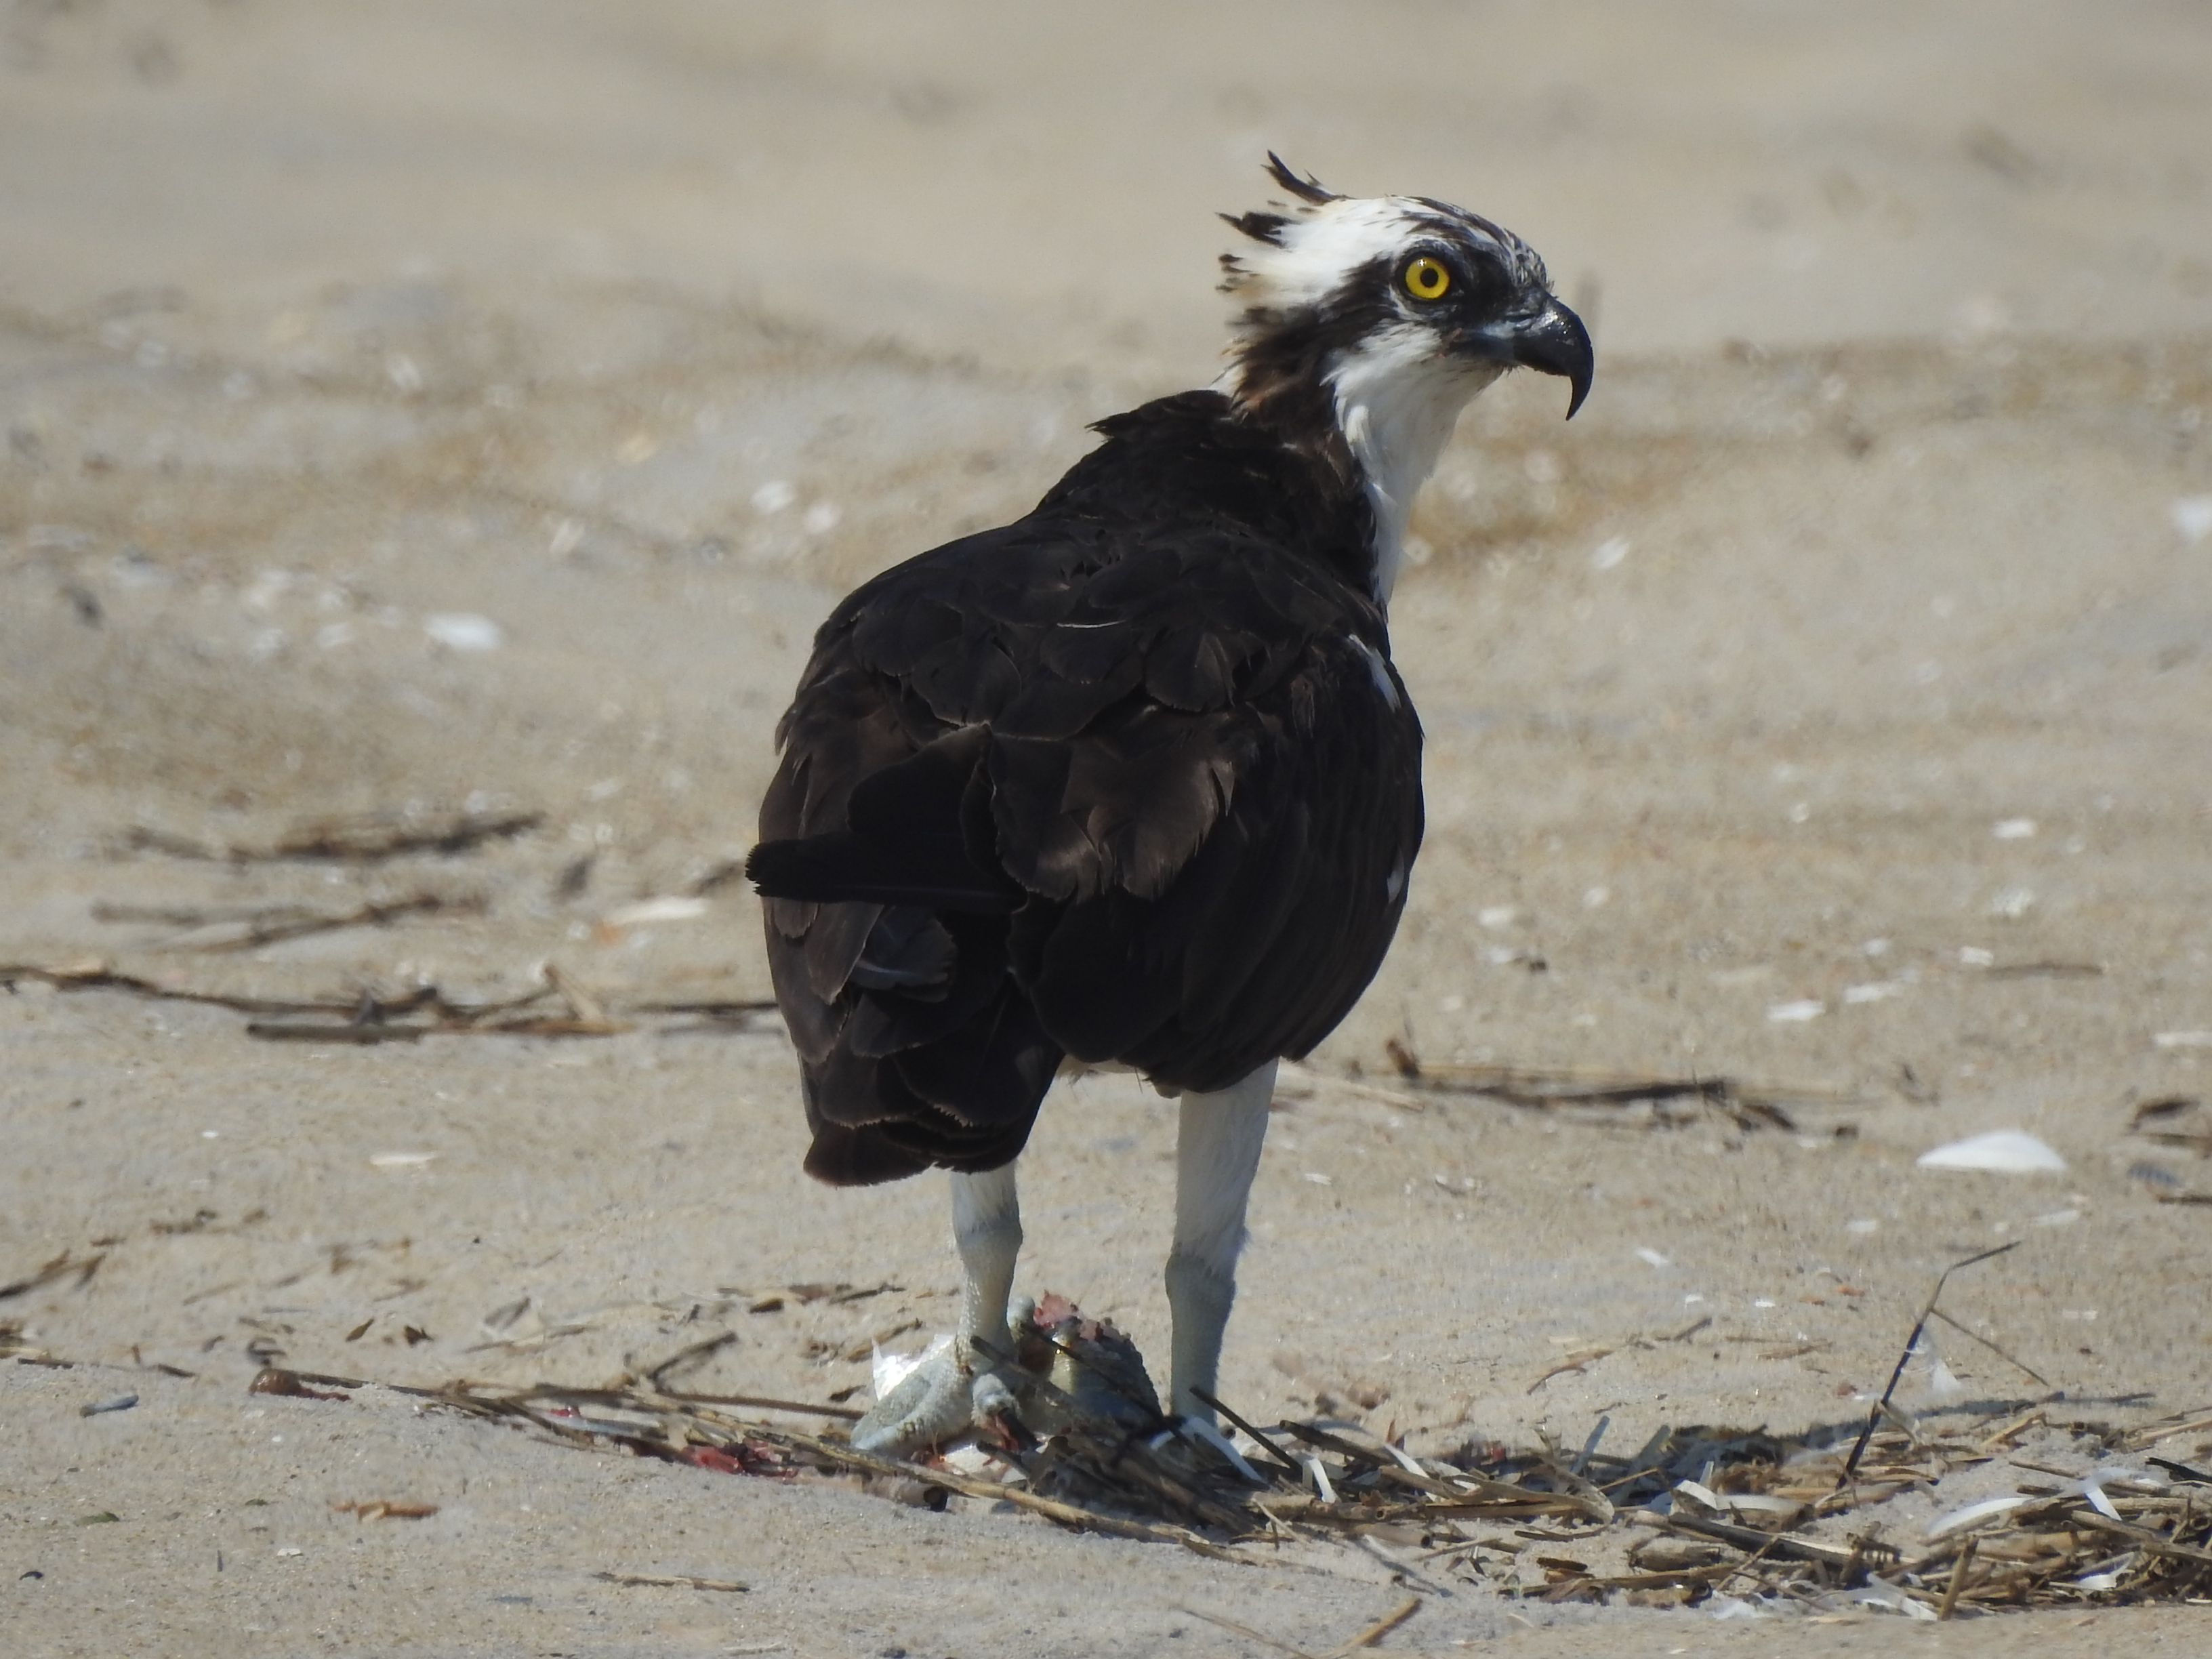 An osprey stands in the sand with one leg on a half-eaten fish